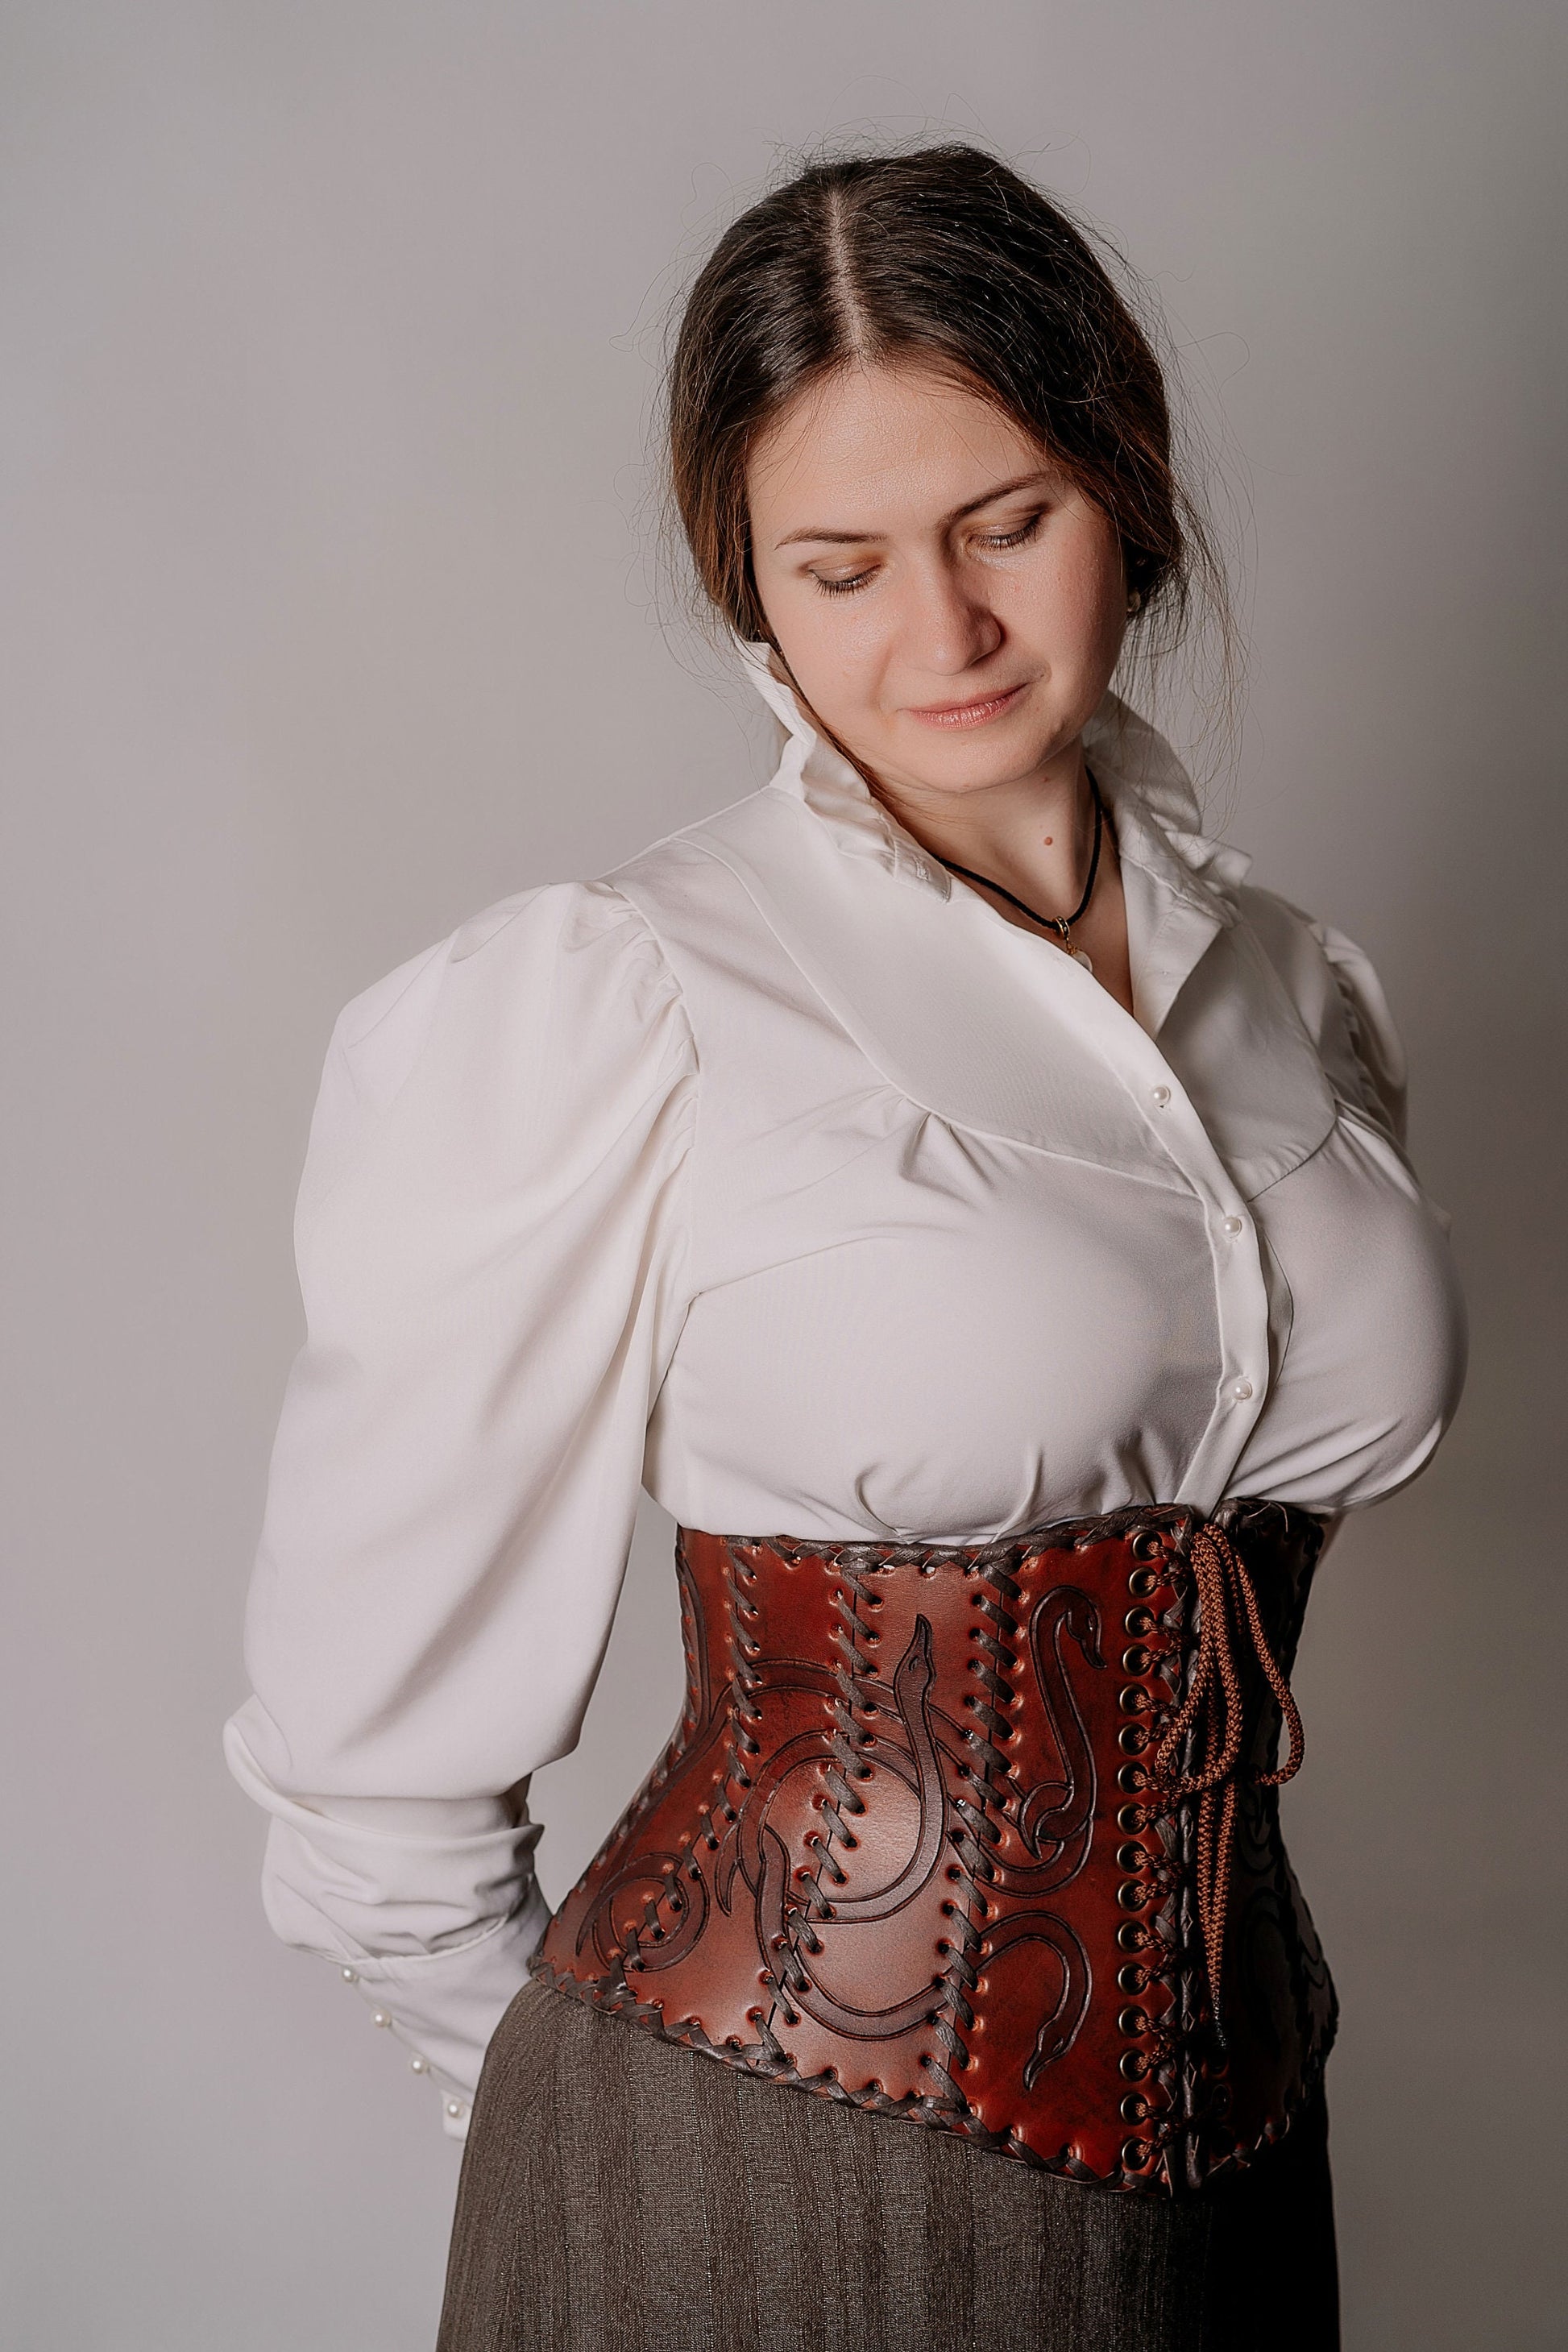 Viking Leather Corset, Medieval Leather Under-bust Corset, LARP Handmade  Leather Corset, Handmade Armor Leather Corset 